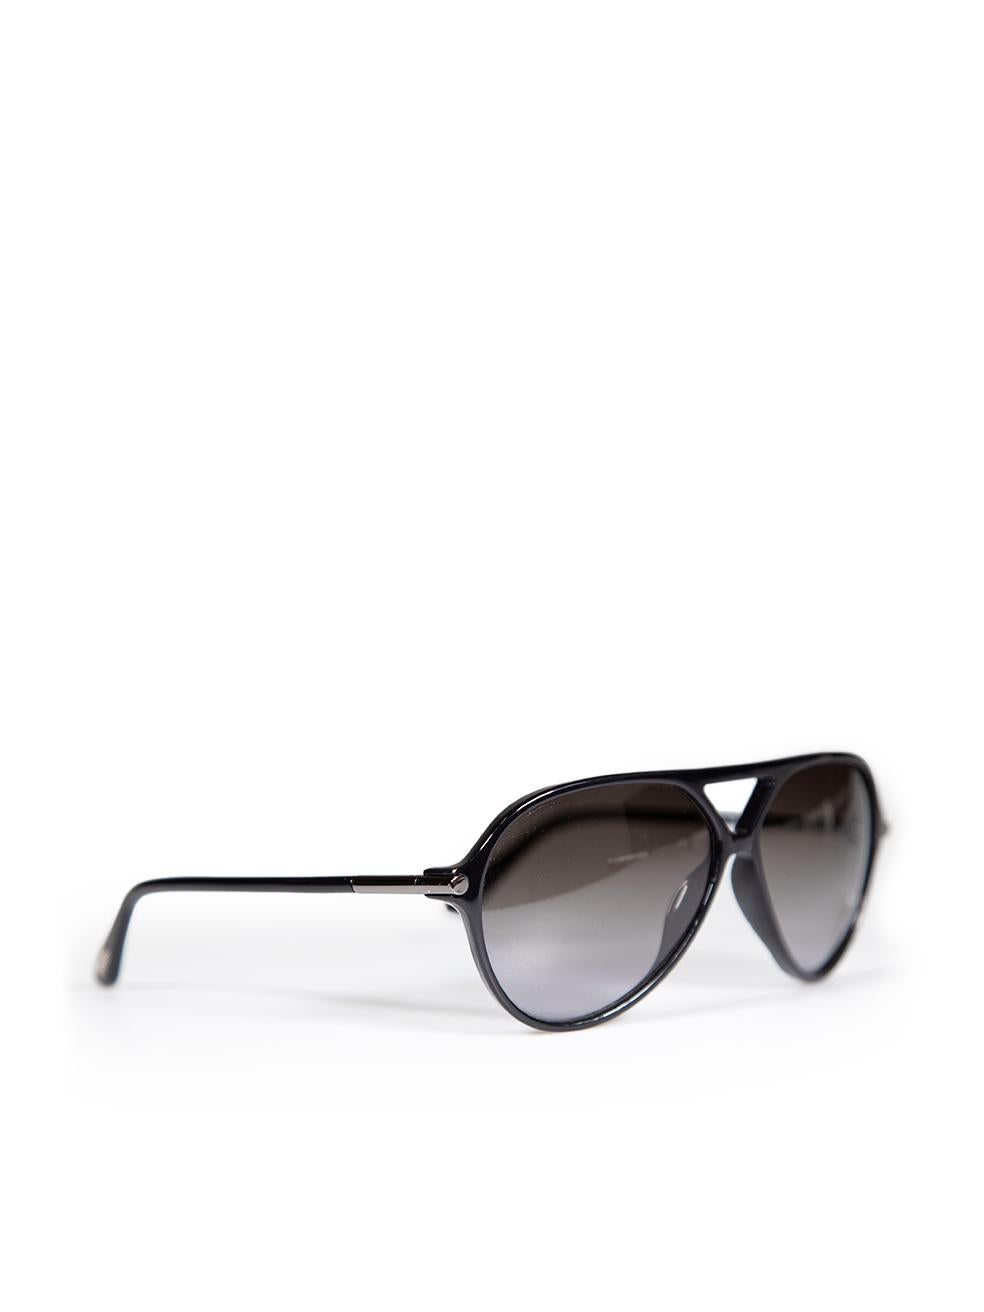 Tom Ford Shiny Black Leopold Sunglasses In New Condition For Sale In London, GB